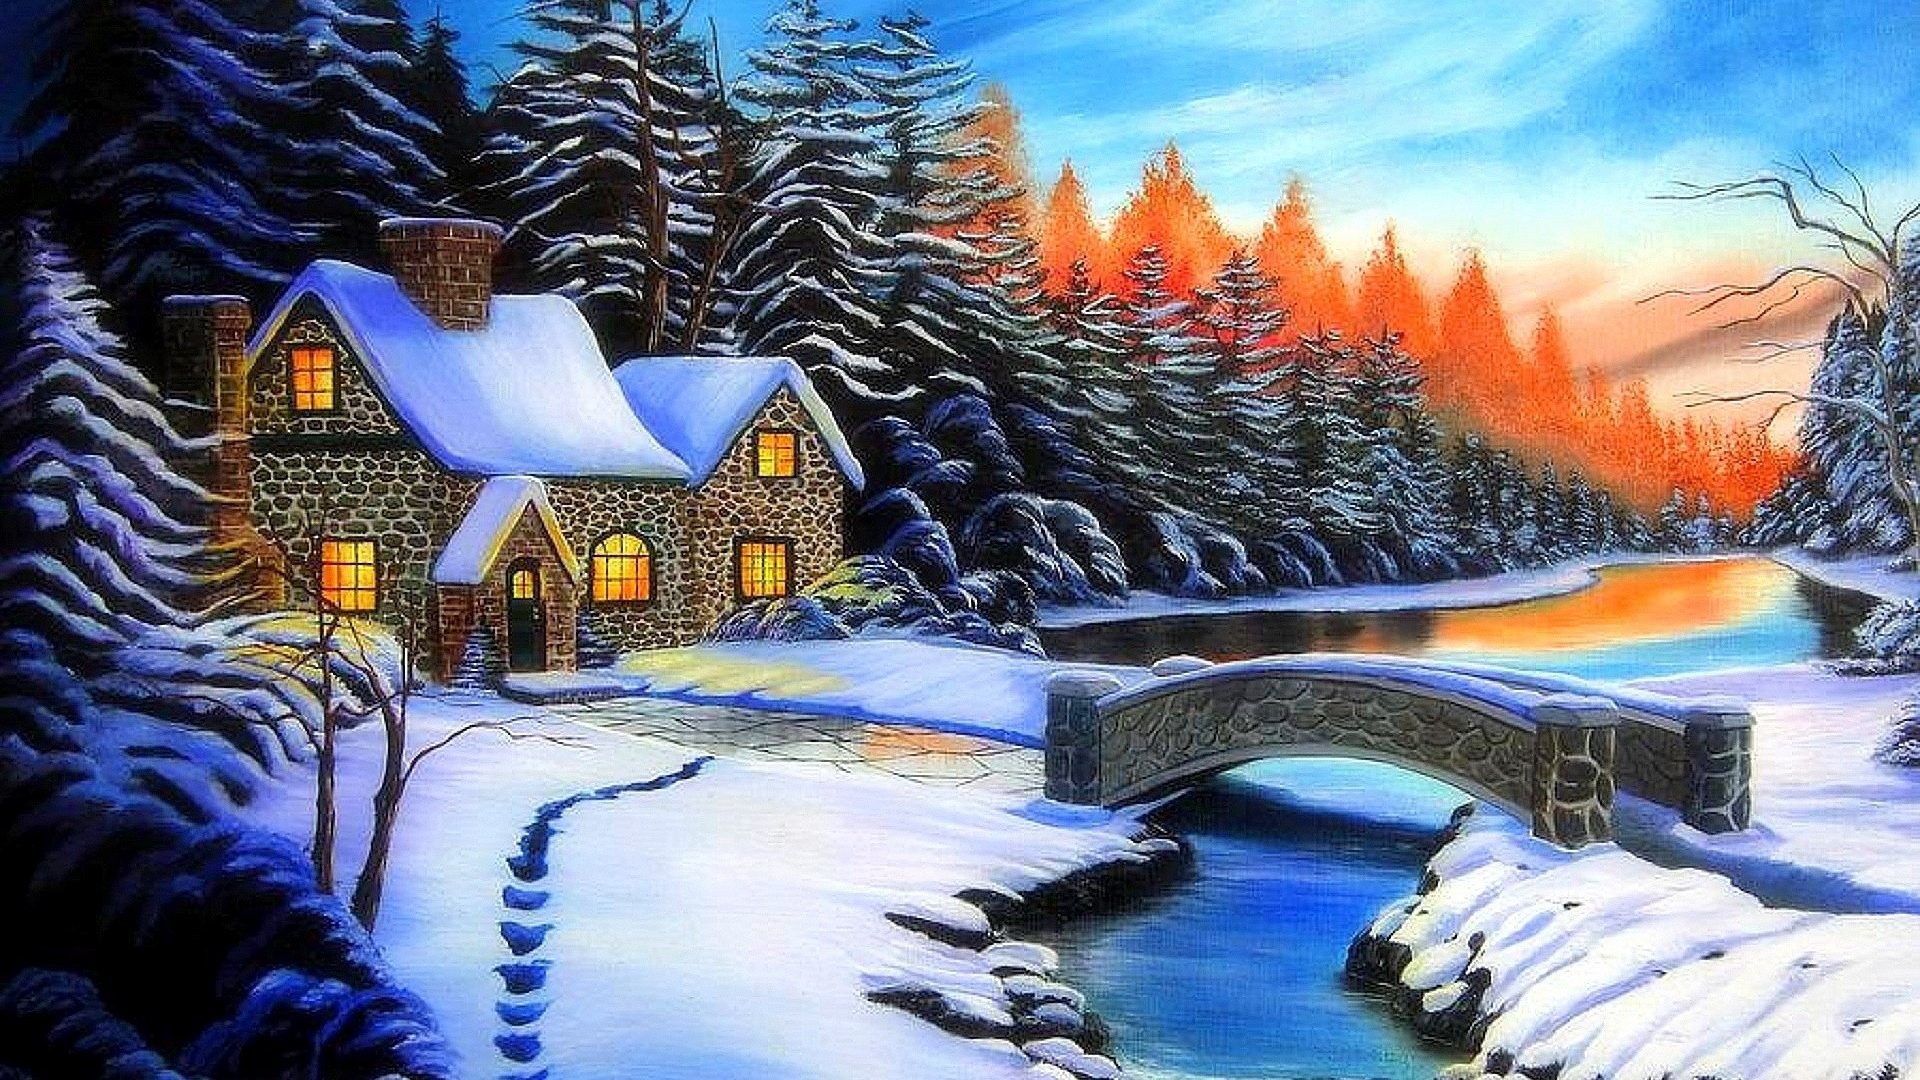 1920x1080 Xmas Tag - Traditional Colors Cool Christmas Drawings Greetings Cozy Love  Architecture Glow Superb Snow Landscapes